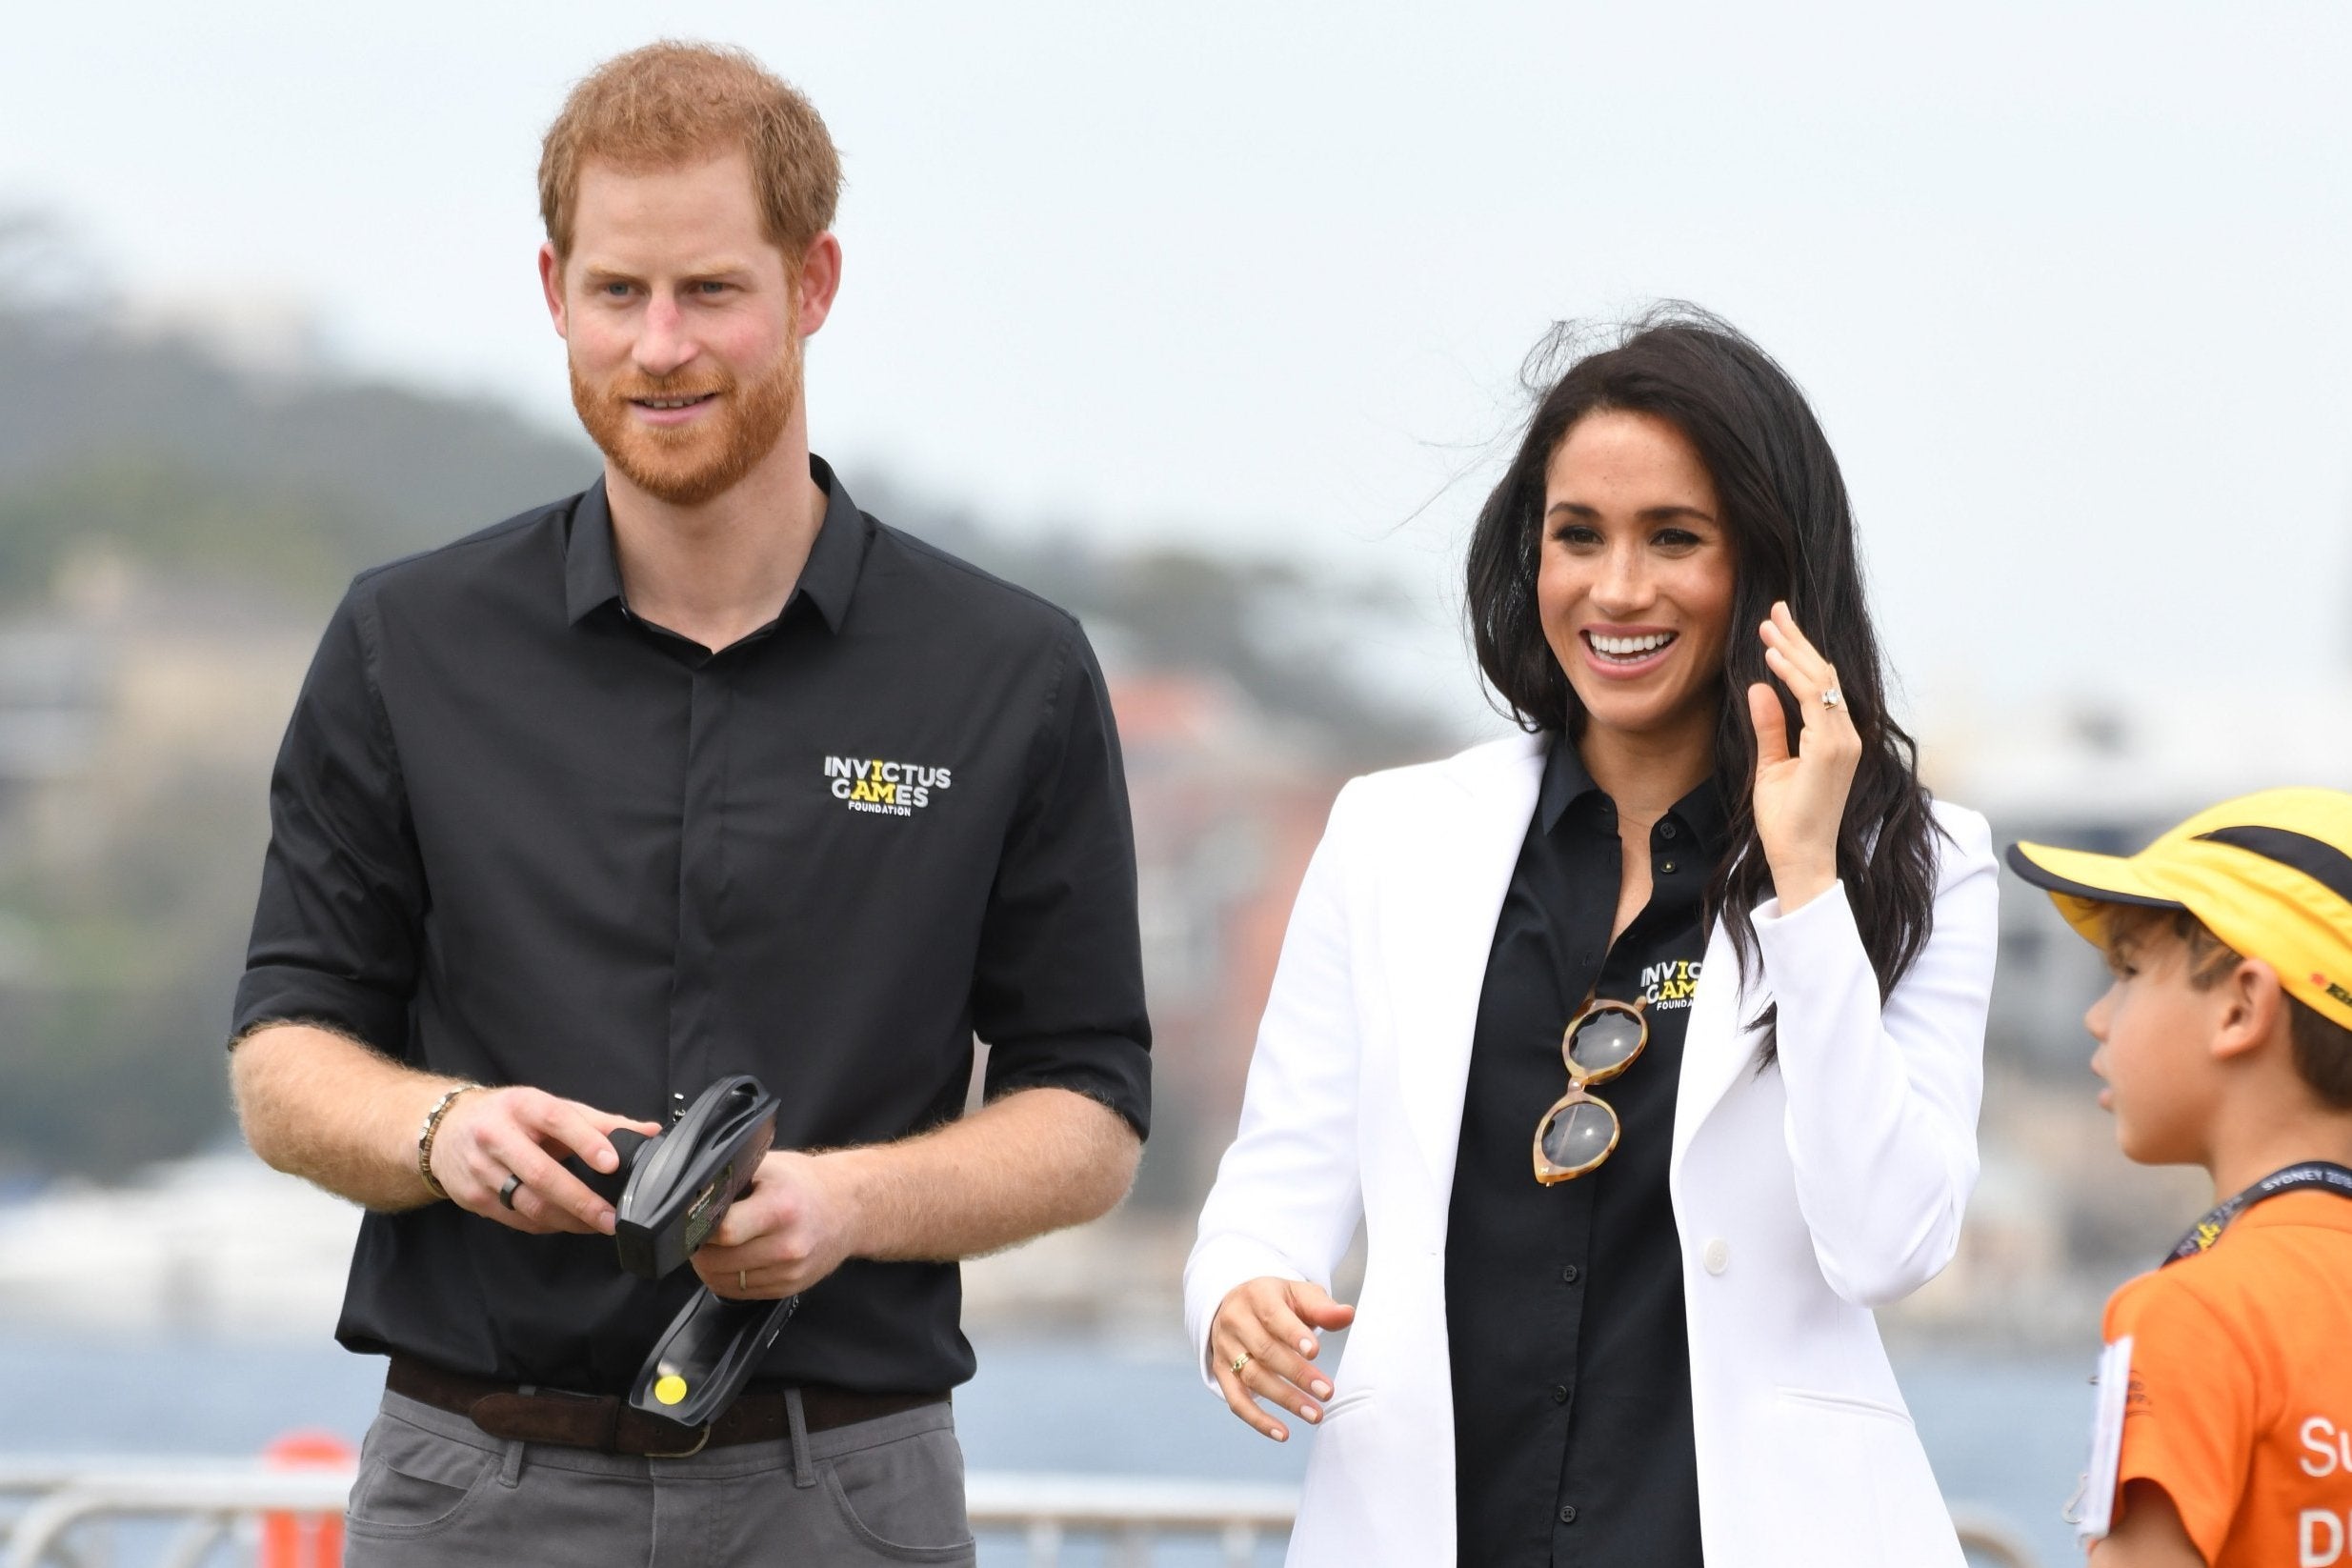 The royal couple pictured at the Invictus Games on Saturday.